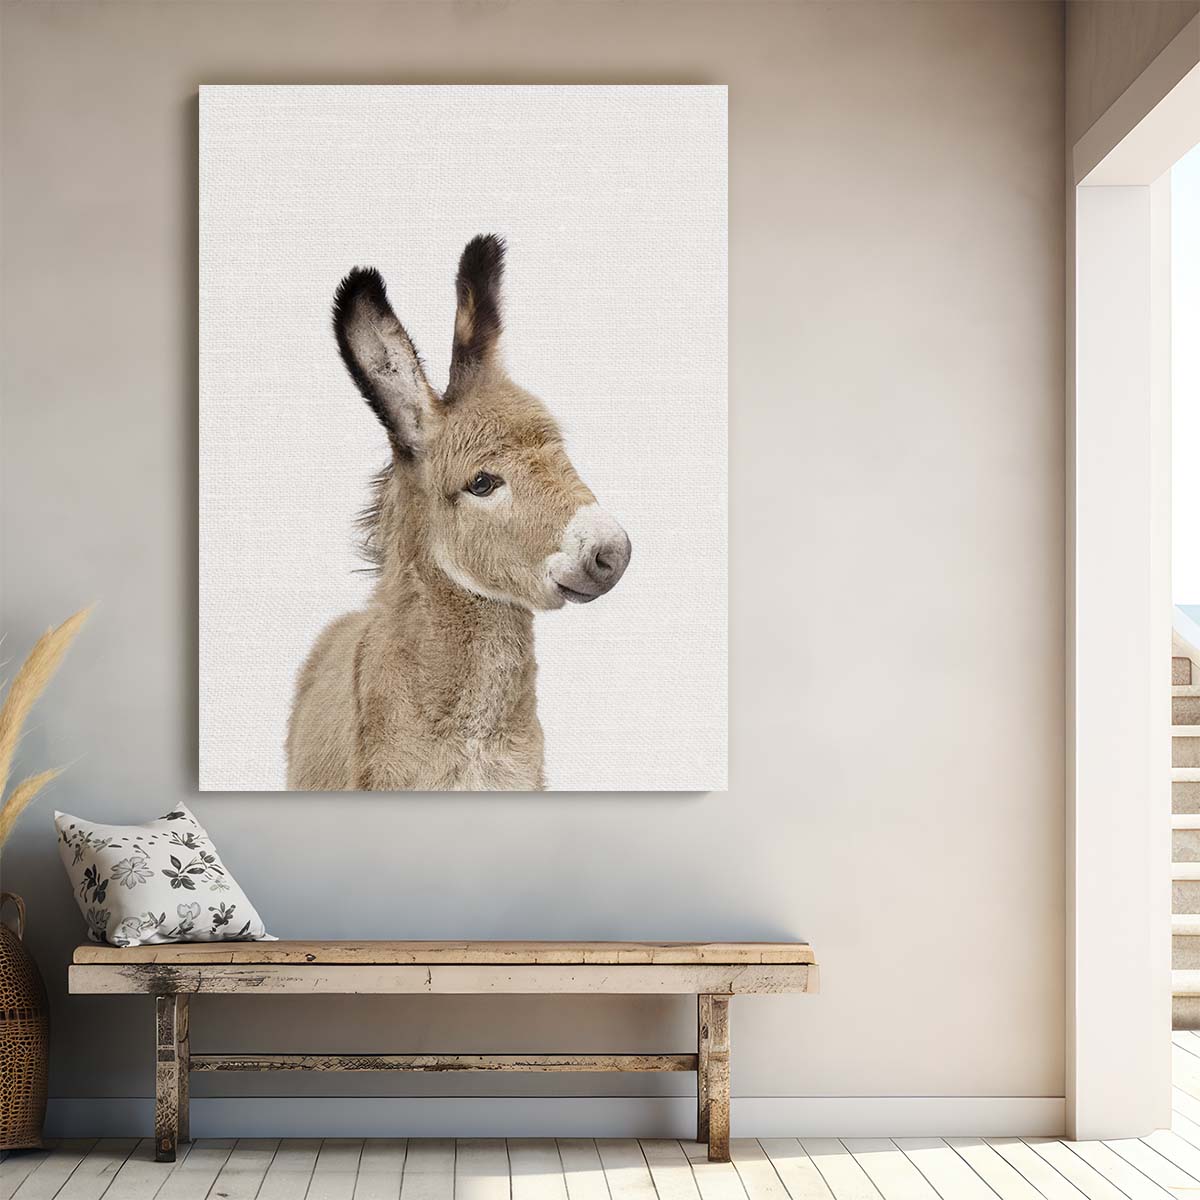 Baby Donkey Photography Art by Kathrin Pienaar by Luxuriance Designs, made in USA